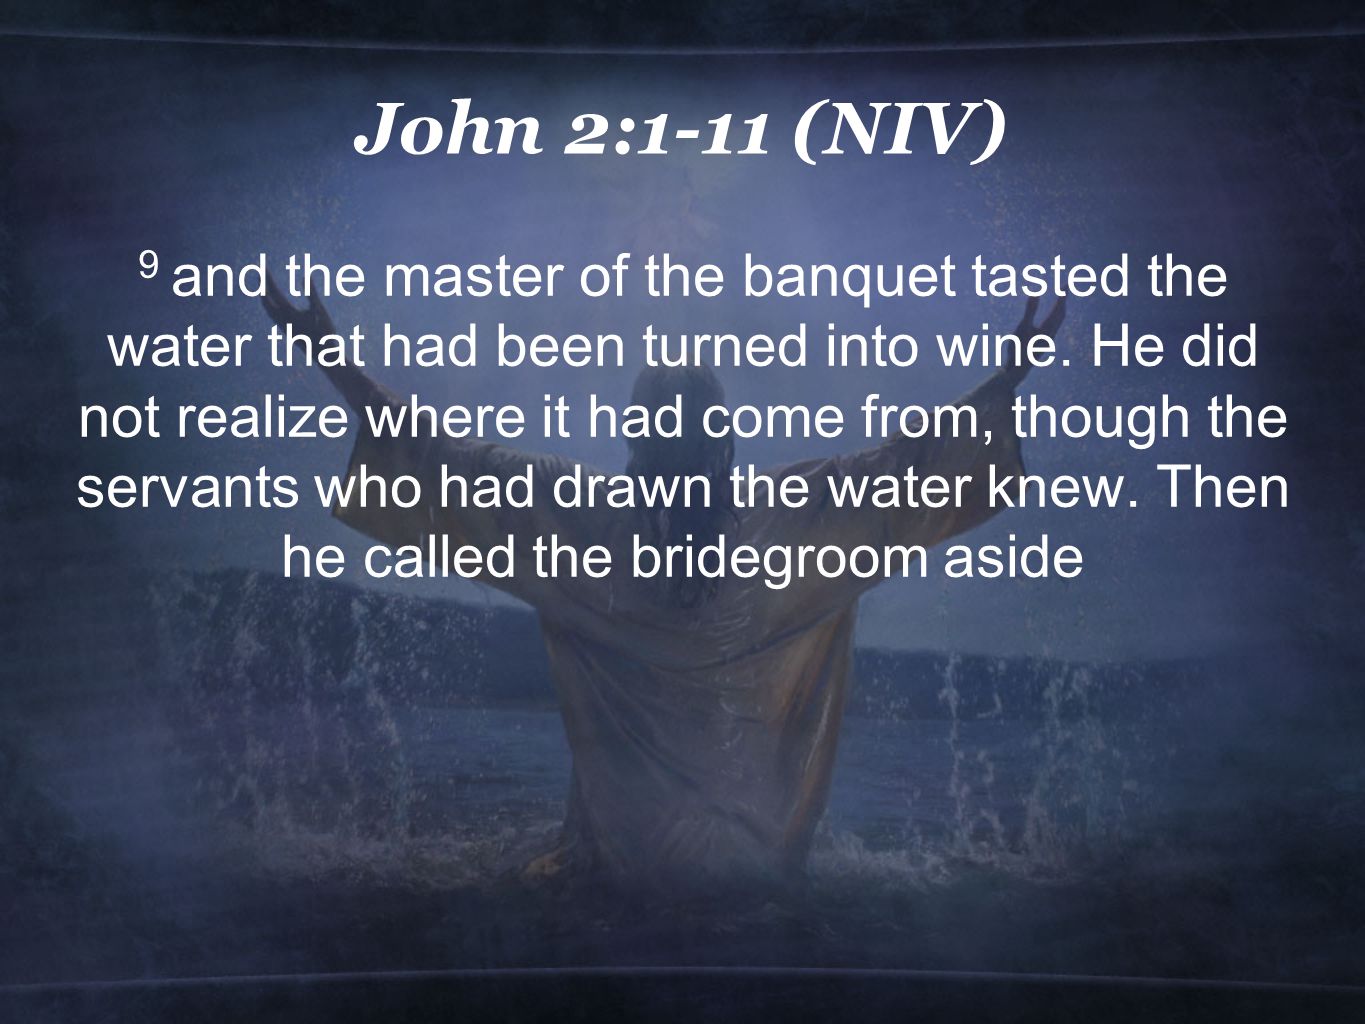 John 2:1-11 (NIV) 9 and the master of the banquet tasted the water that had been turned into wine.